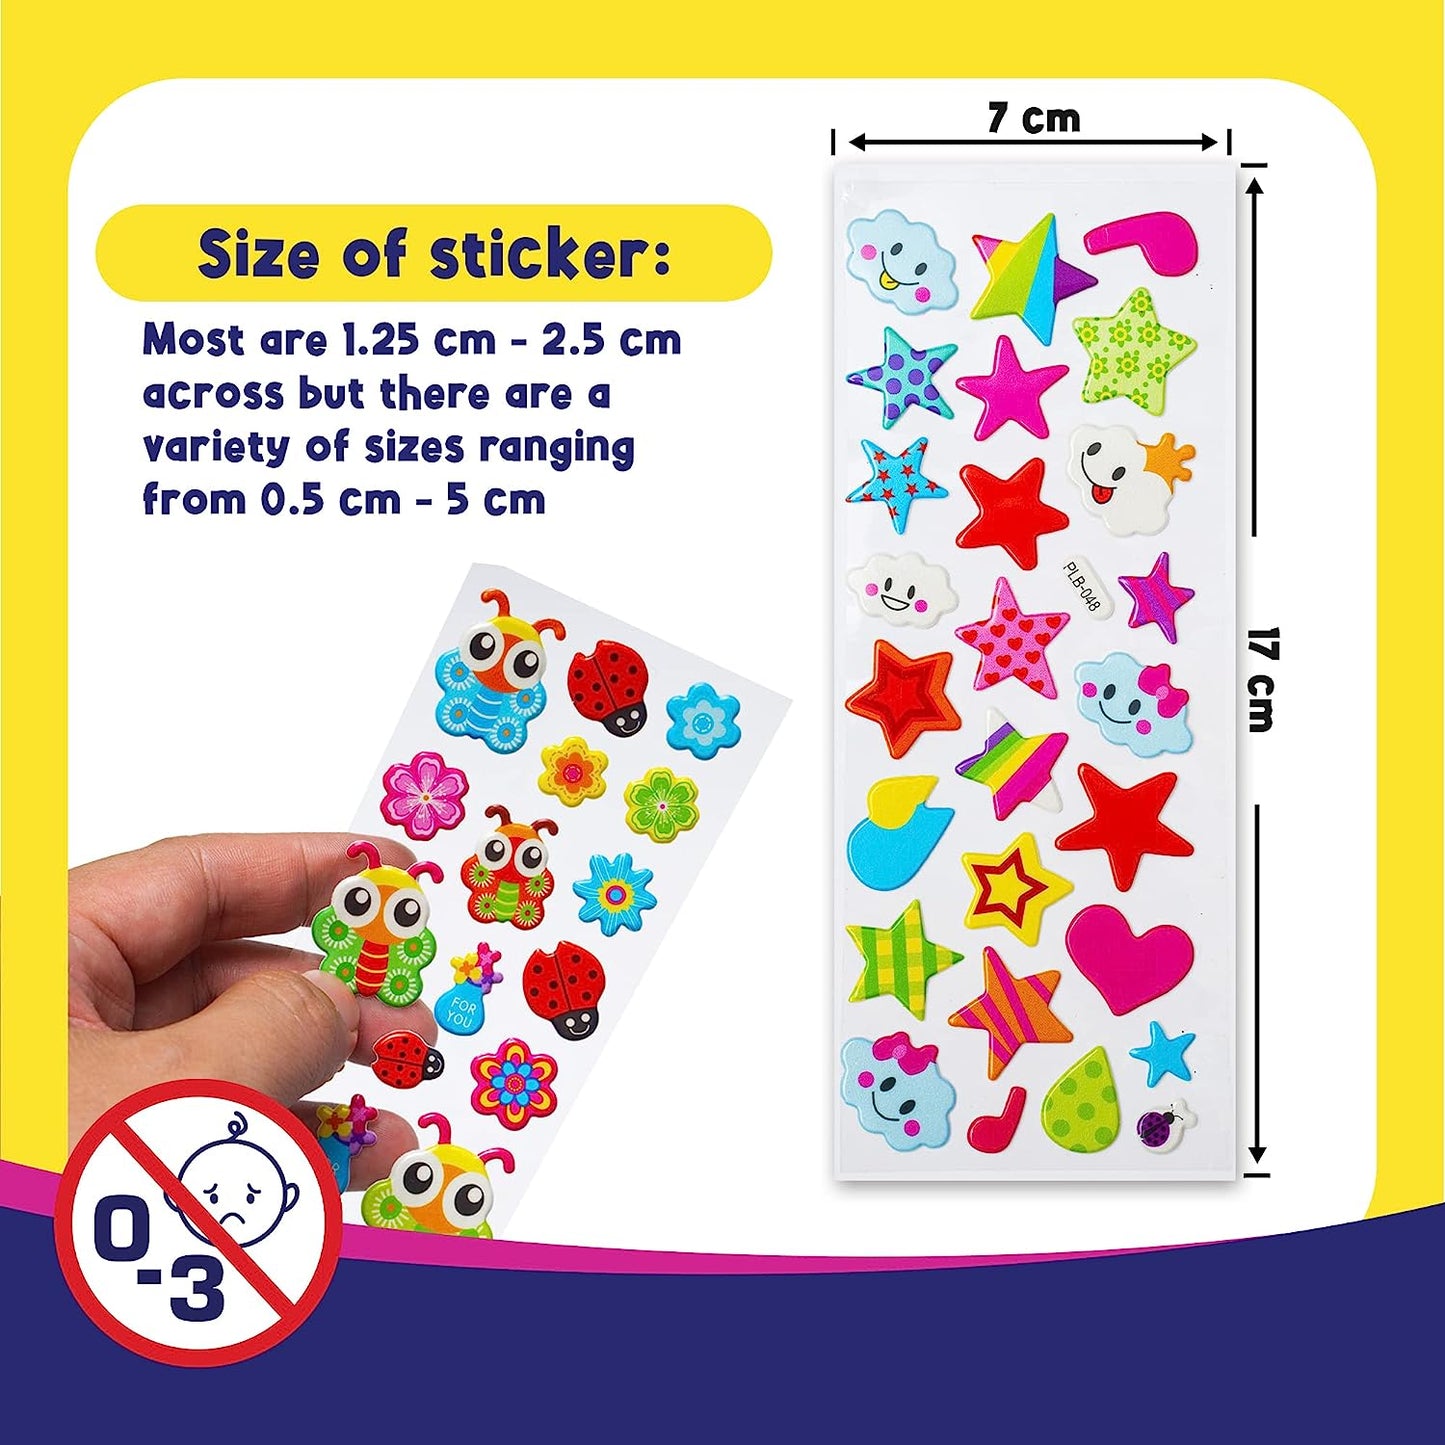 Emoji Stickers Sheets - 12 Count